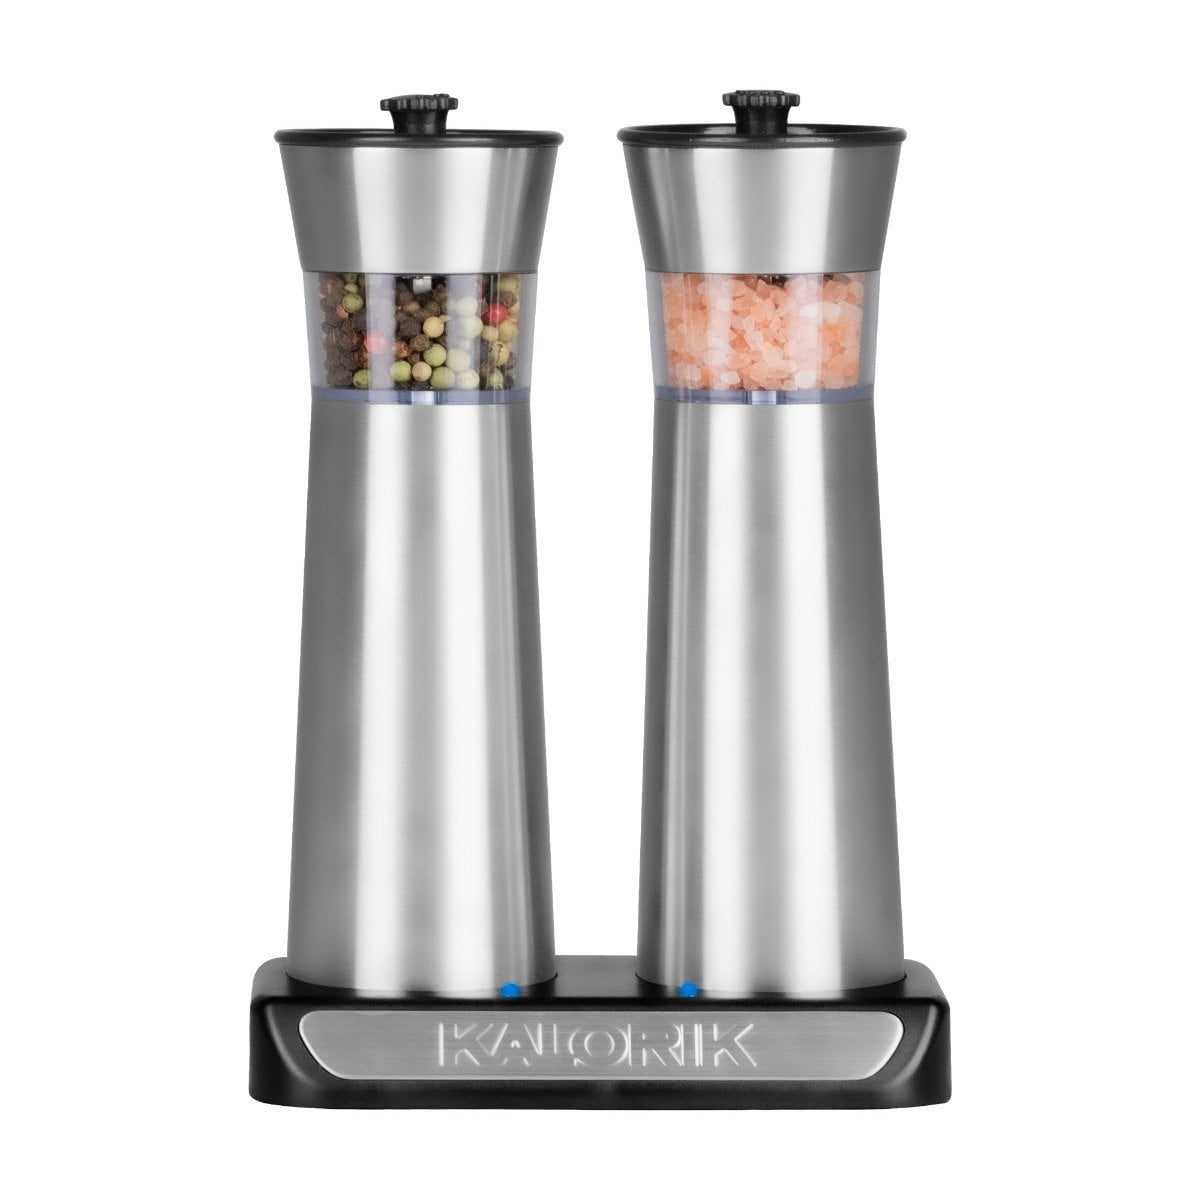 Rechargeable Gravity Salt and Pepper Grinder Set - Stainless Steel Electric